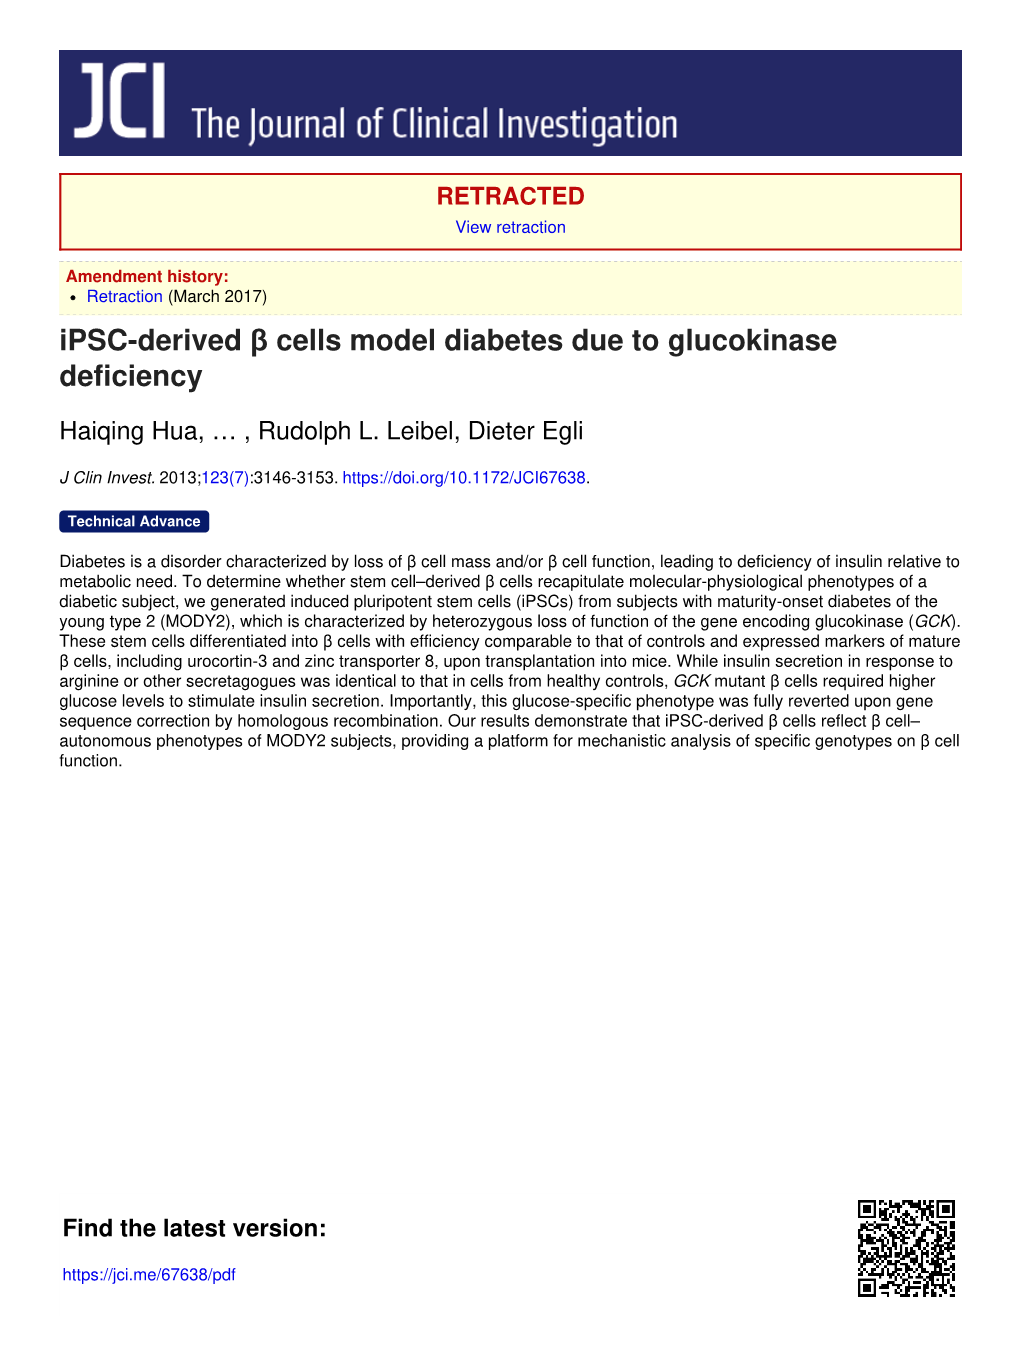 Ipsc-Derived Β Cells Model Diabetes Due to Glucokinase Deficiency